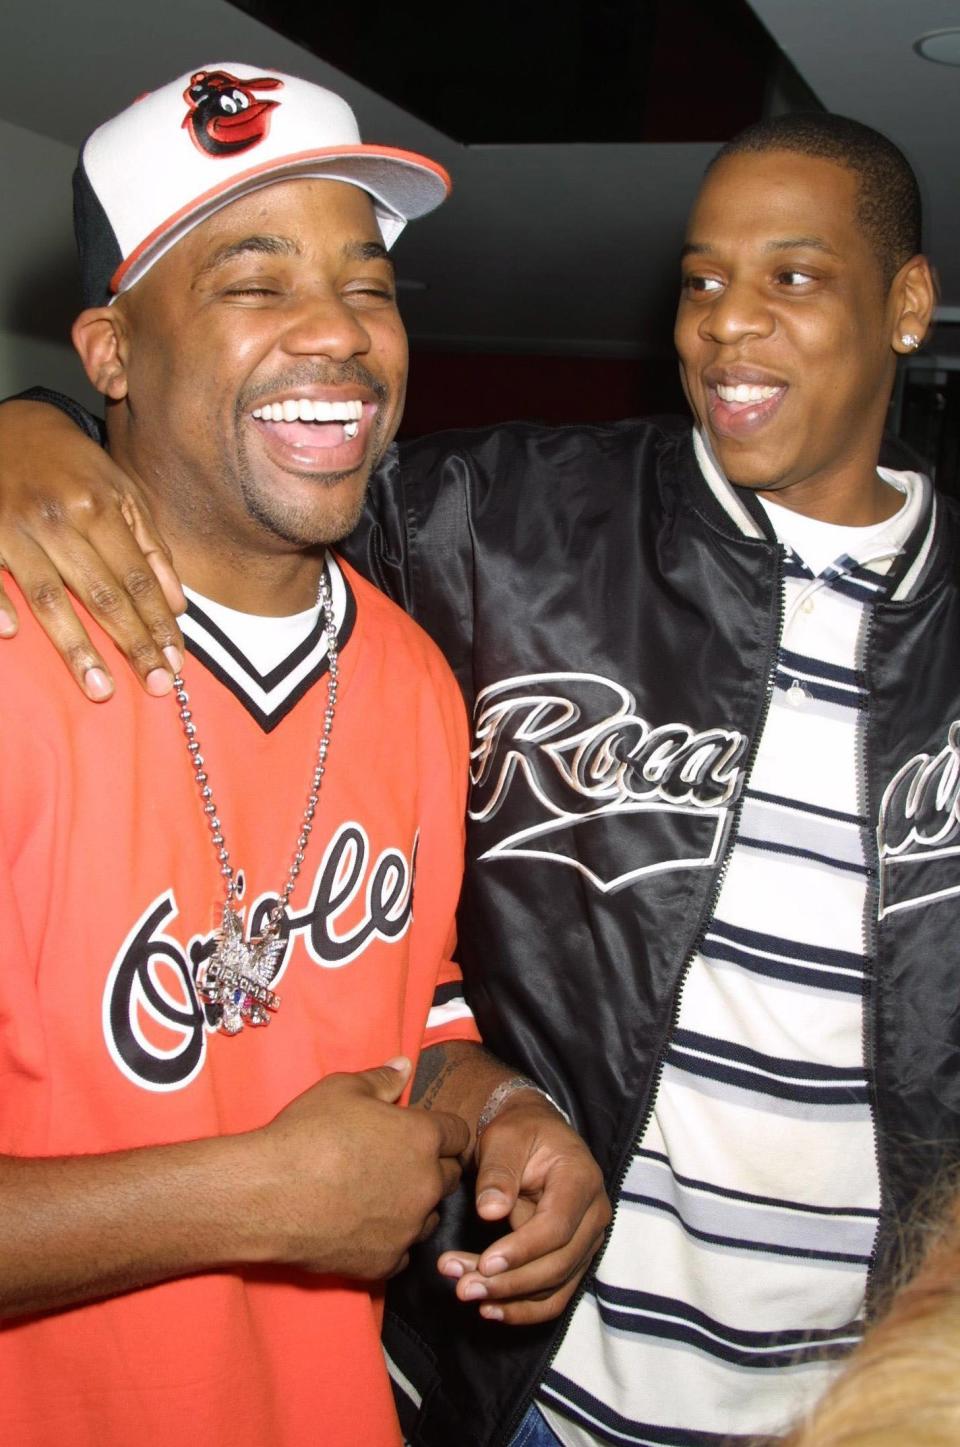 JAY-Z co-founded Roc-A-Fella Records in 1995 with Damon "Dame" Dash and Kareem "Biggs" Burke.